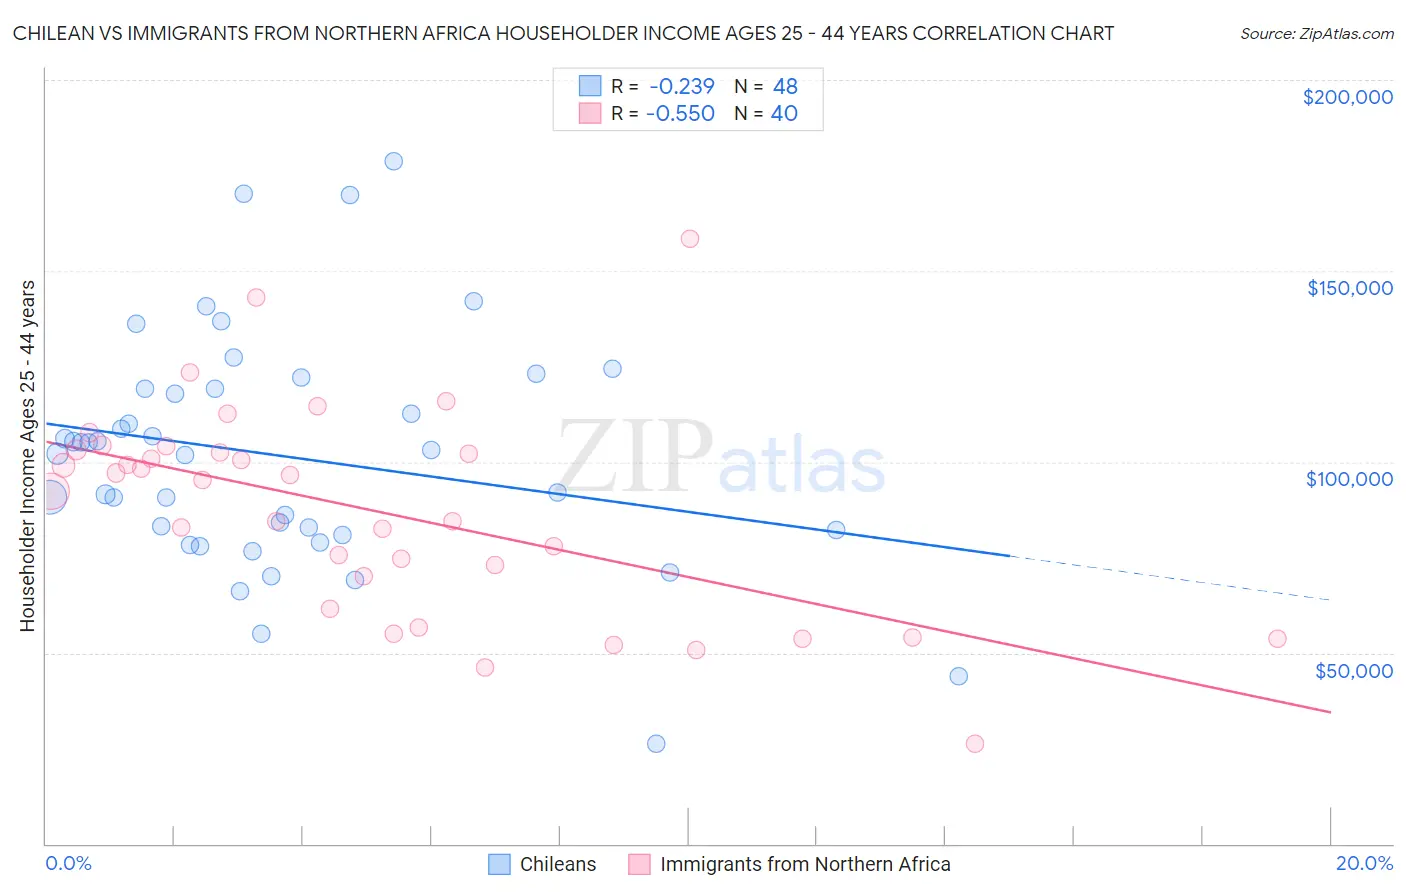 Chilean vs Immigrants from Northern Africa Householder Income Ages 25 - 44 years